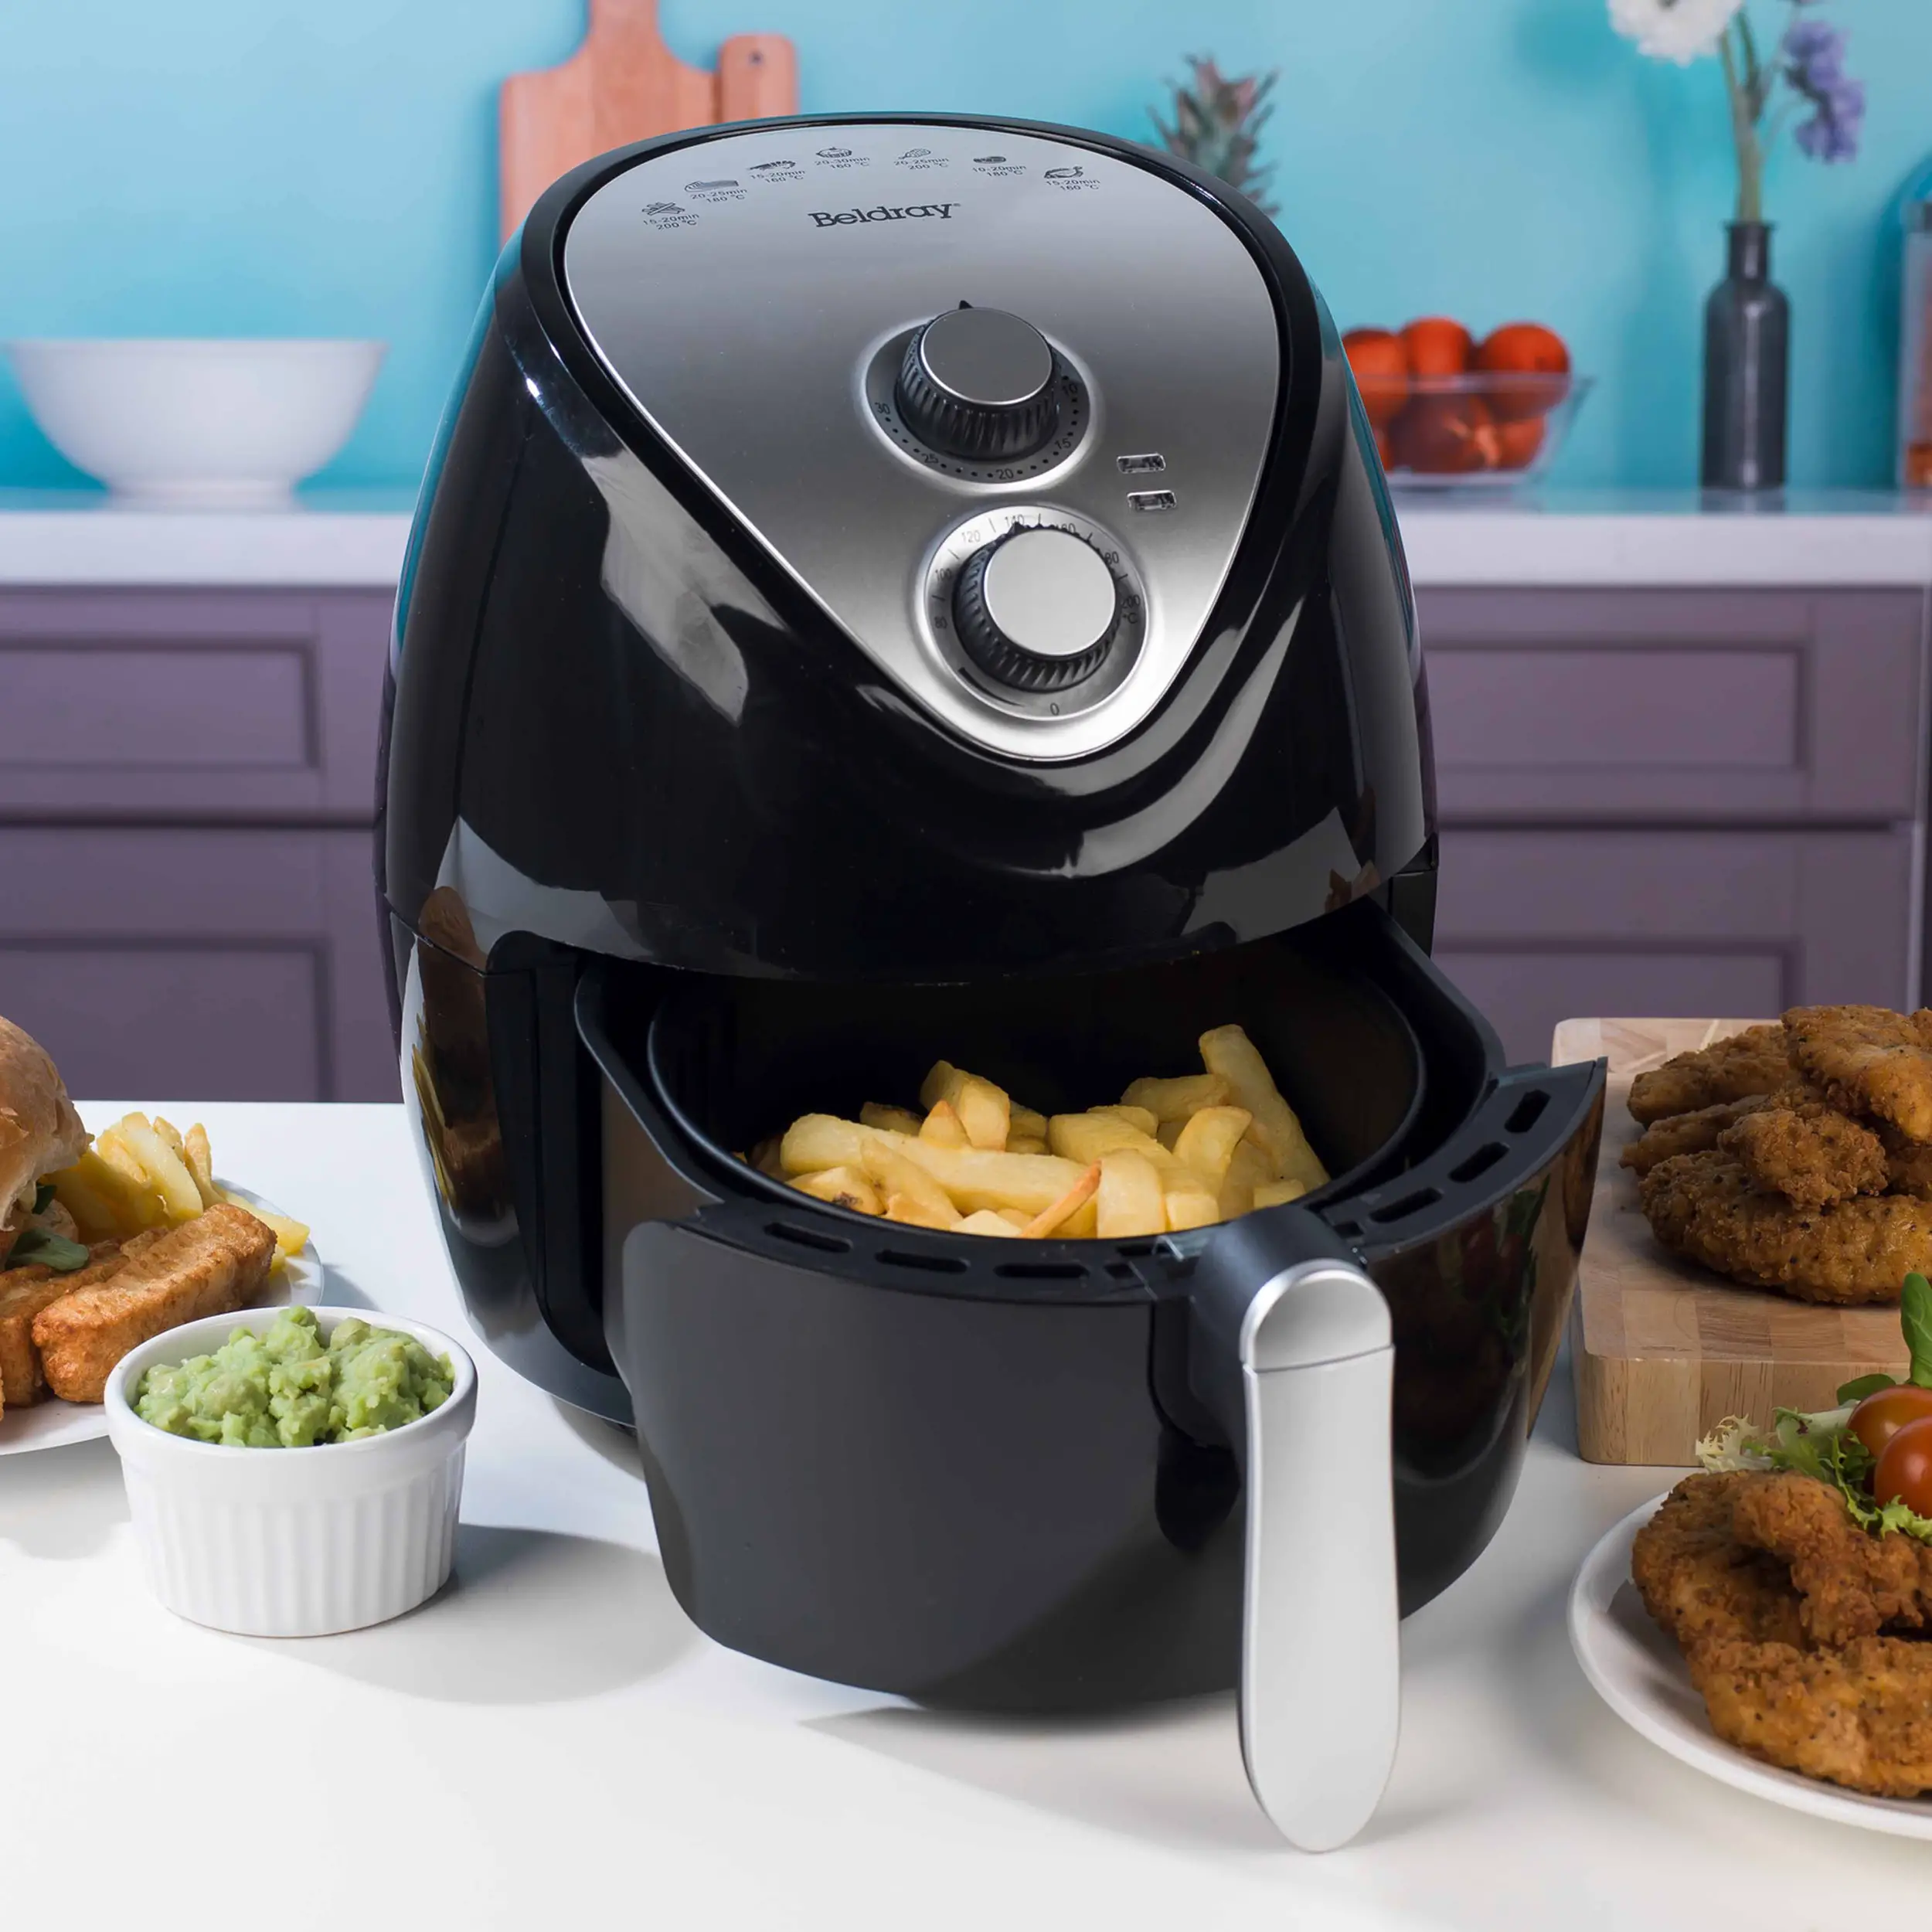 Beldray Large Healthy Air Fryer with 30 Minute Timer, 3.2 Litre, Black ...